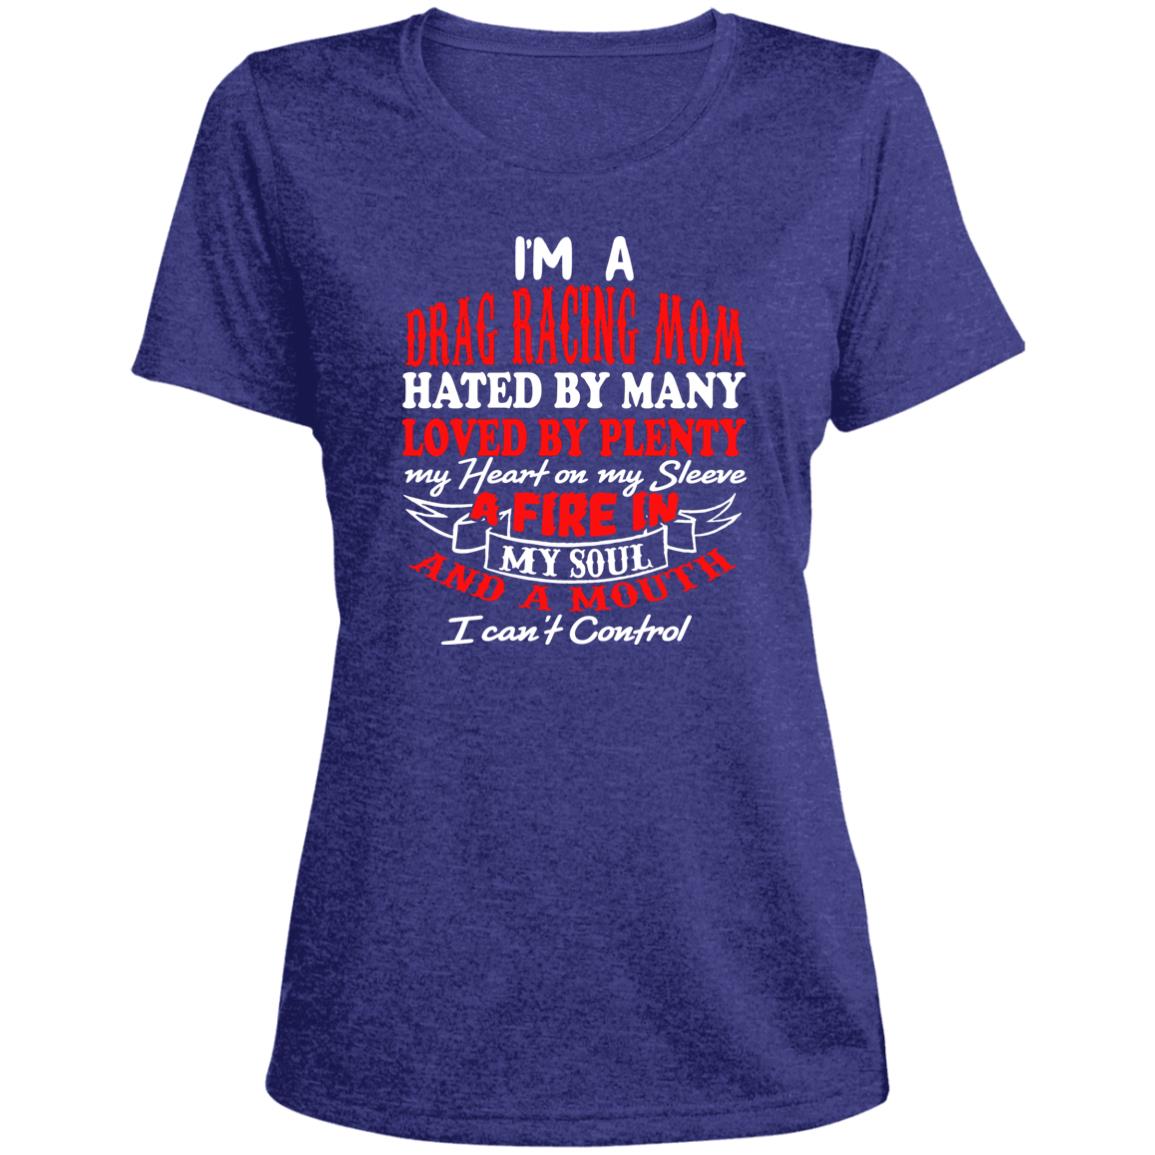 I'm A Drag Racing Mom Hated By Many Loved By Plenty Ladies' Heather Scoop Neck Performance Tee